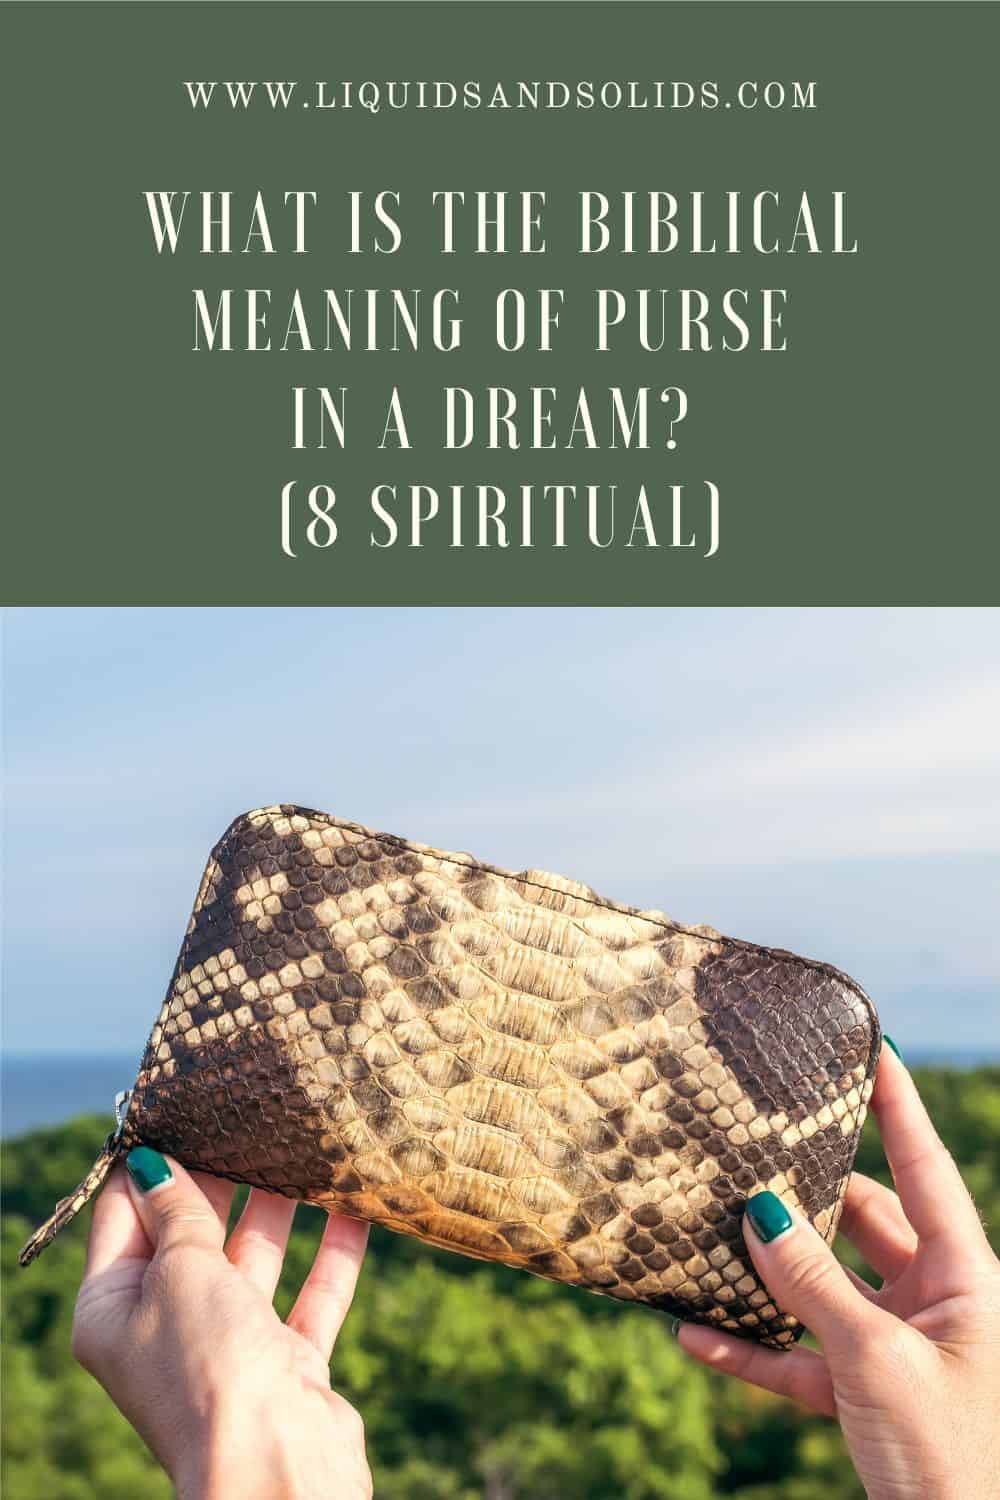 What Does The Bible Say About Purses?